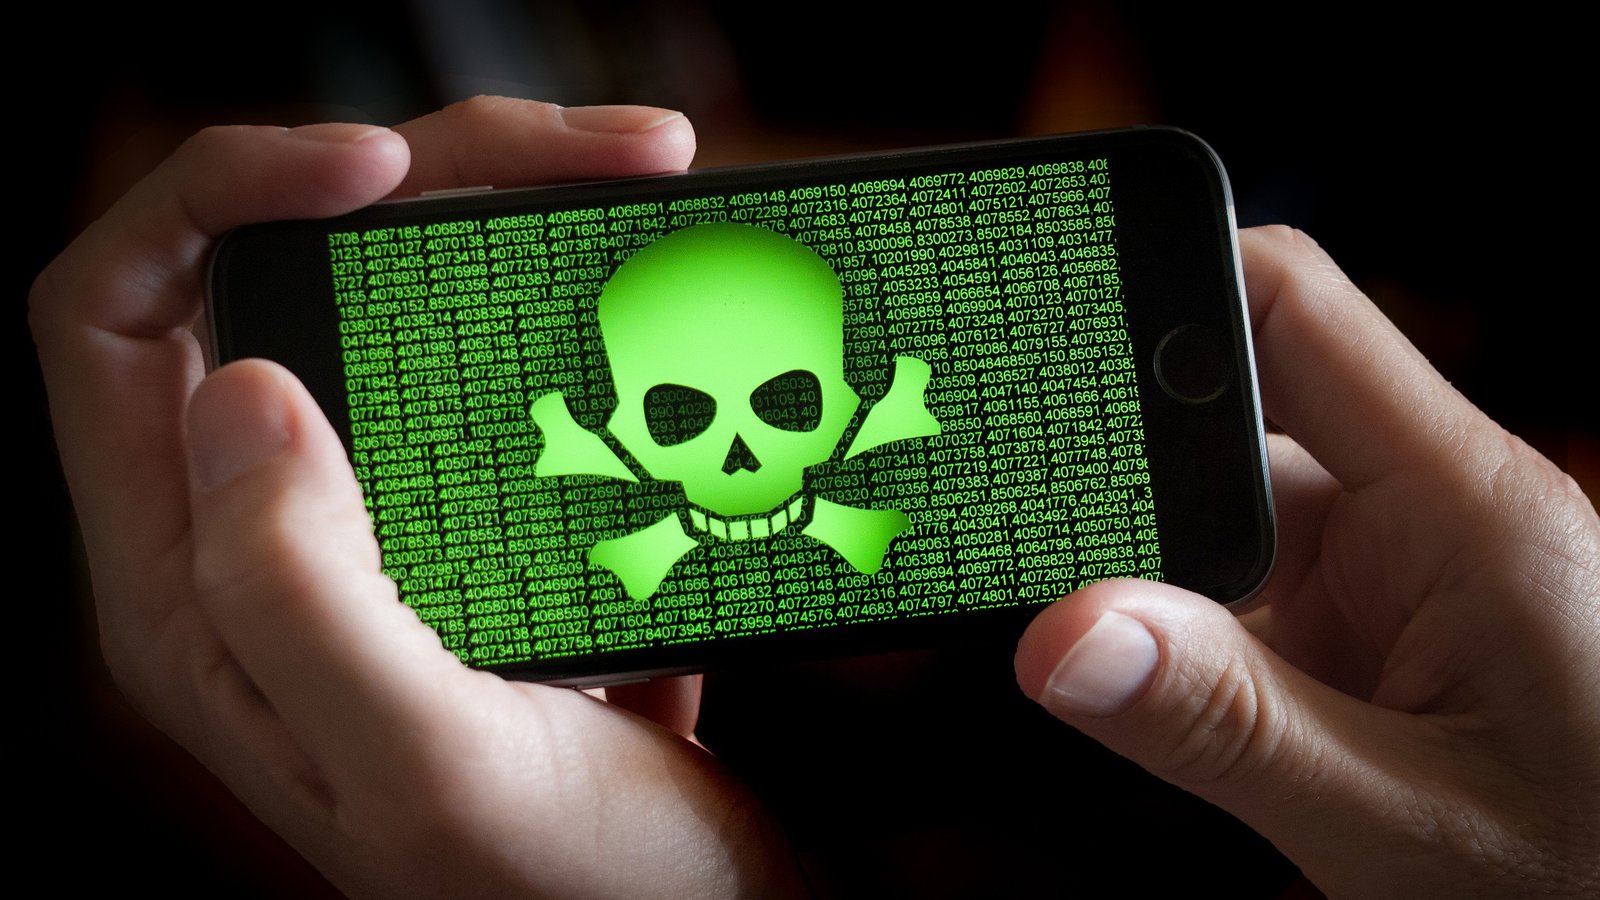 Joker Malware Has Been Found - Delete These Android Apps Immediately